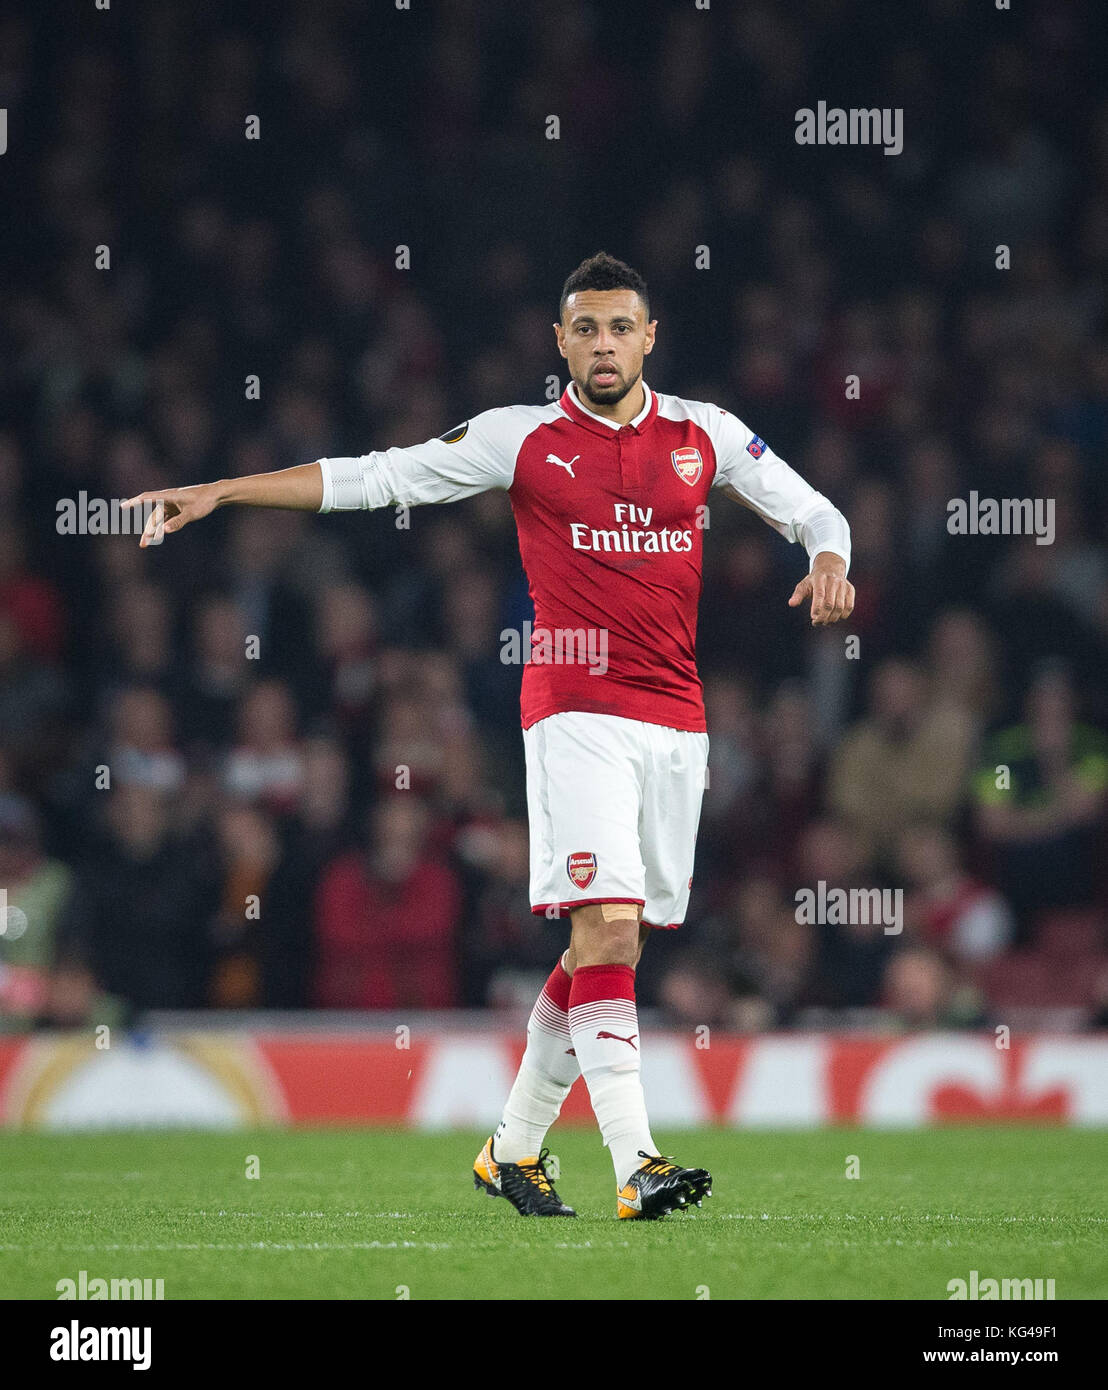 London, UK. 02nd Nov, 2017. Francis Coquelin of Arsenal during the UEFA Europa League group stage match between Arsenal and FC Red Star Belgrade at the Emirates Stadium, London, England on 2 November 2017. Photo by Andy Rowland. Credit: Andrew Rowland/Alamy Live News Stock Photo